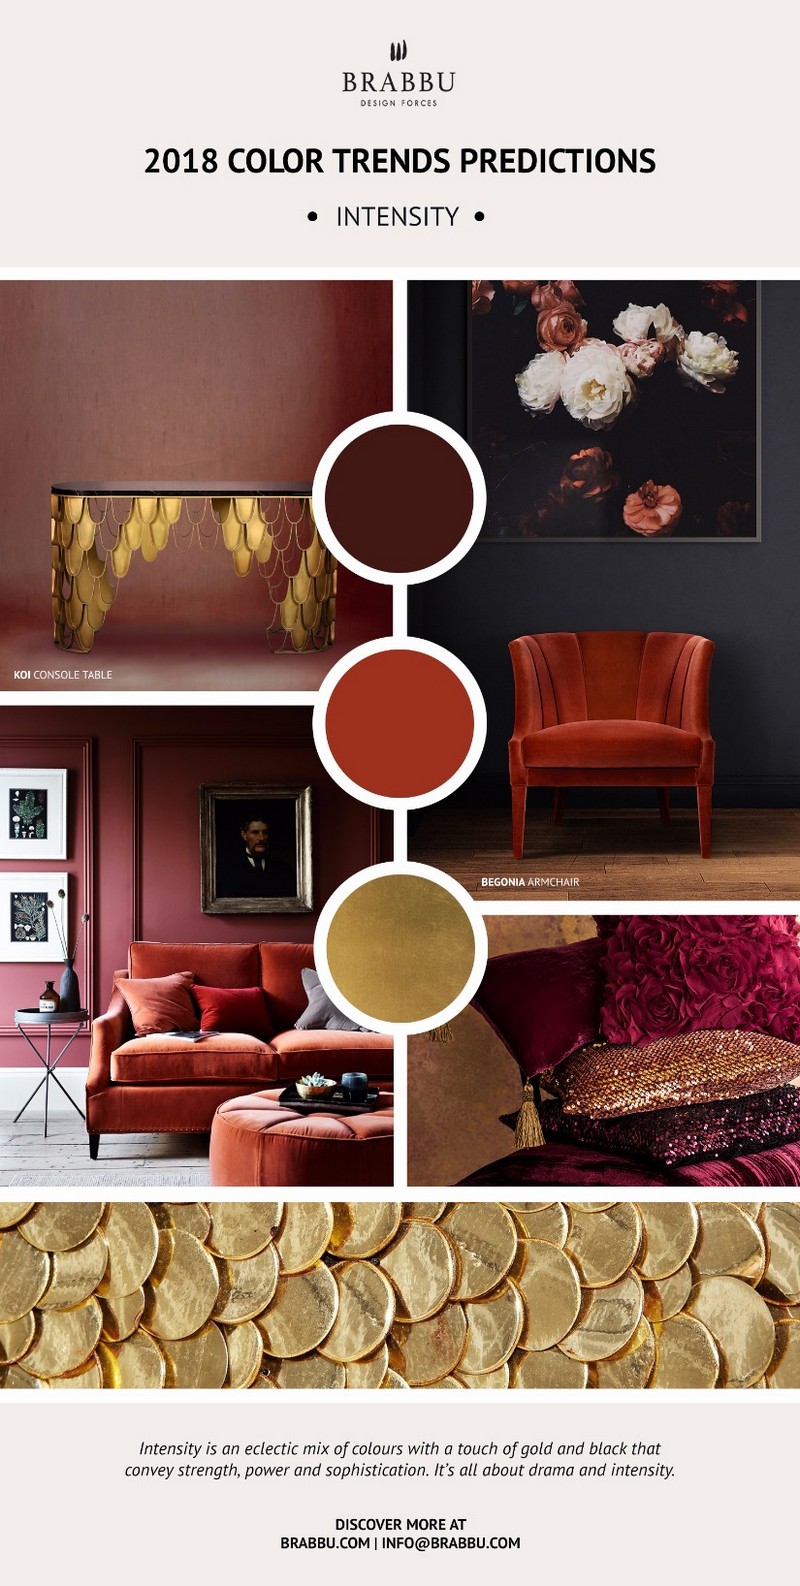 Watch Out: 2018 Pantone Color Trends Predictions Are Here